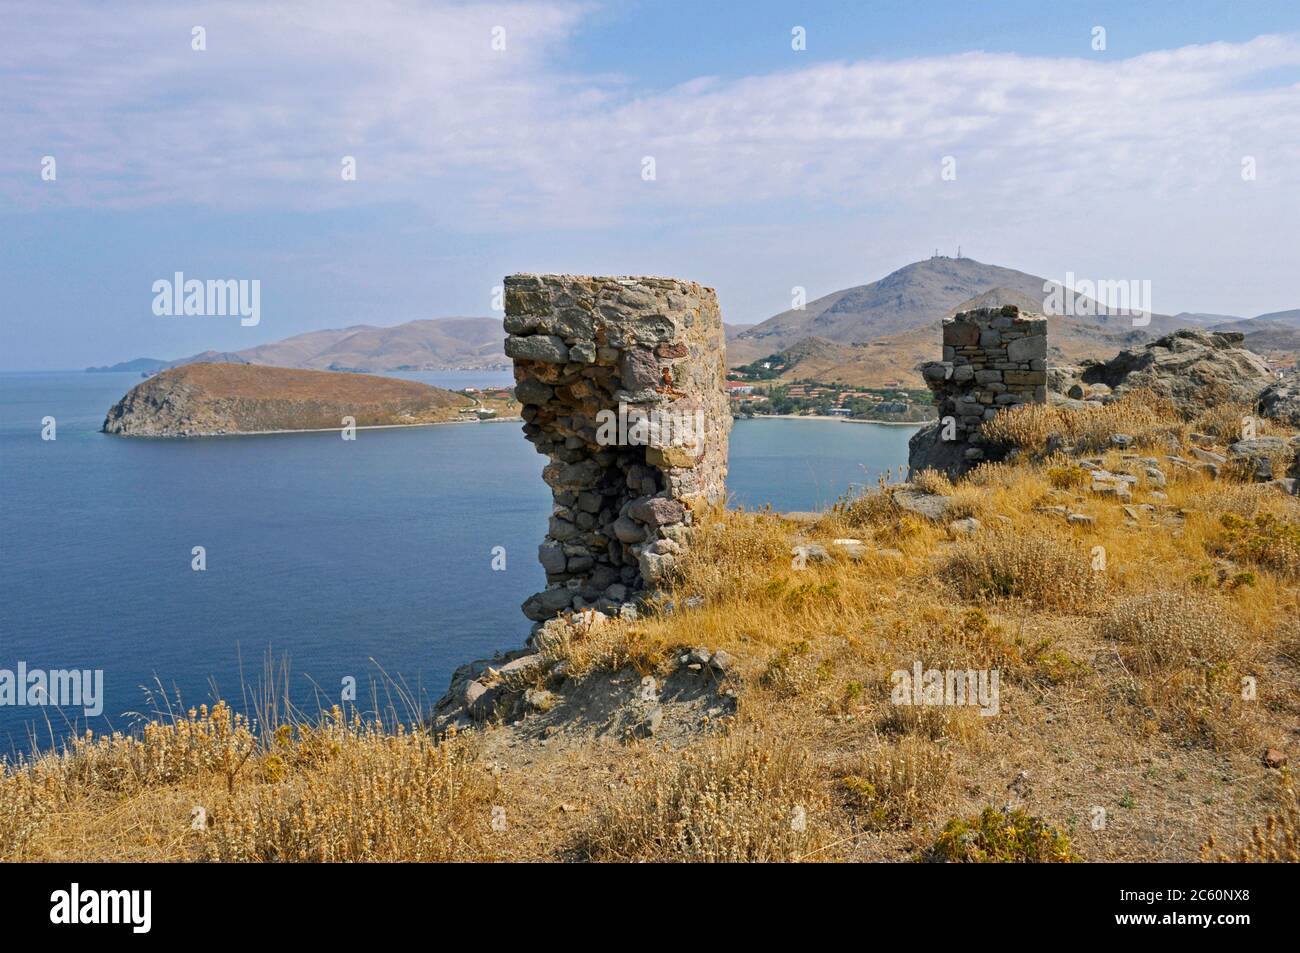 Ancient castle stonewall remnants on the west side of the castle of Myrina, Lemnos or Limnos island, Greece Stock Photo